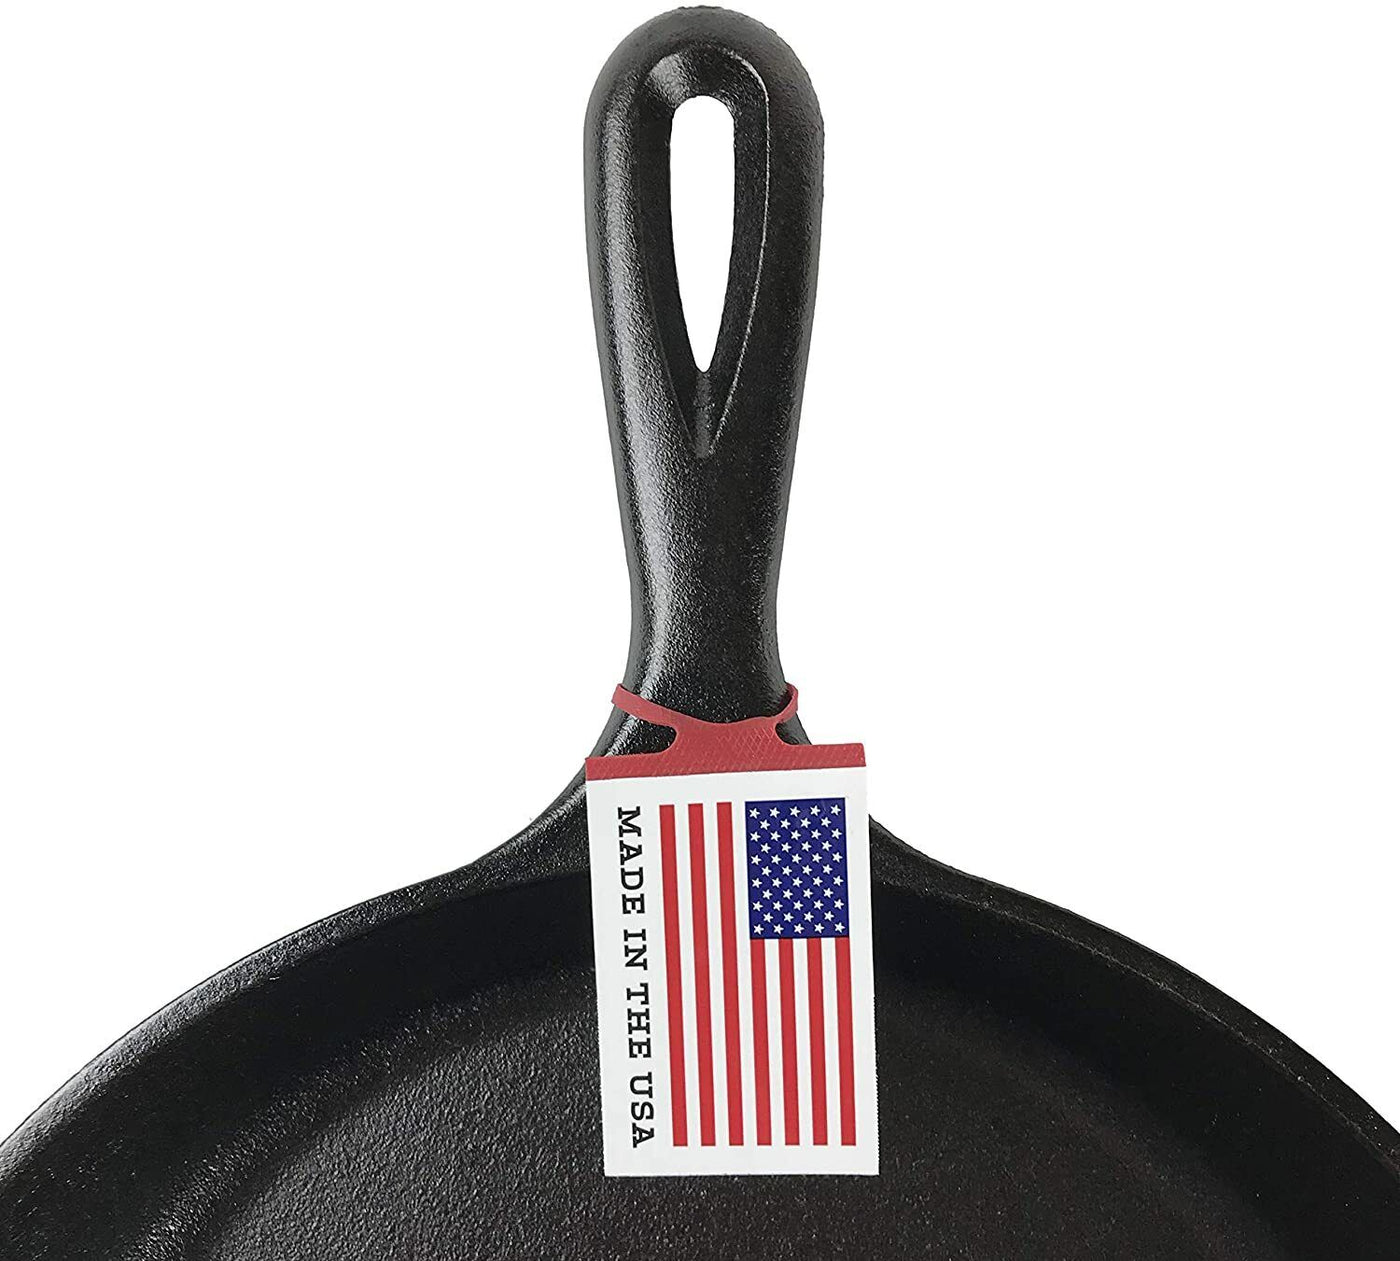 LODGE CAST IRON: 10.5 INCH GRIDDLE - MADE IN THE USA - NEW